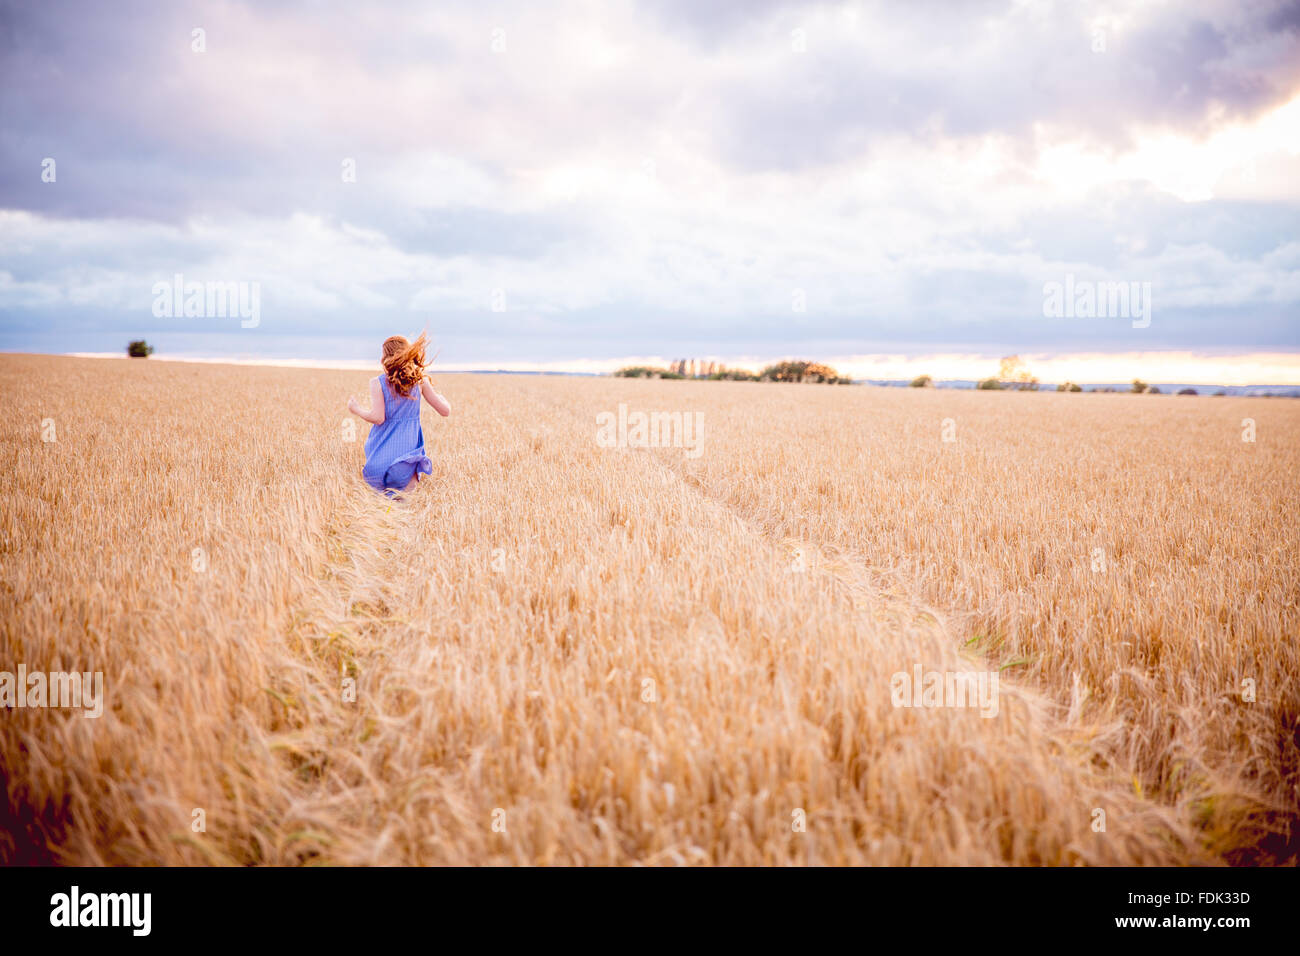 Rear view of a girl running through barley field, Bedfordshire, England, United Kingdom Stock Photo